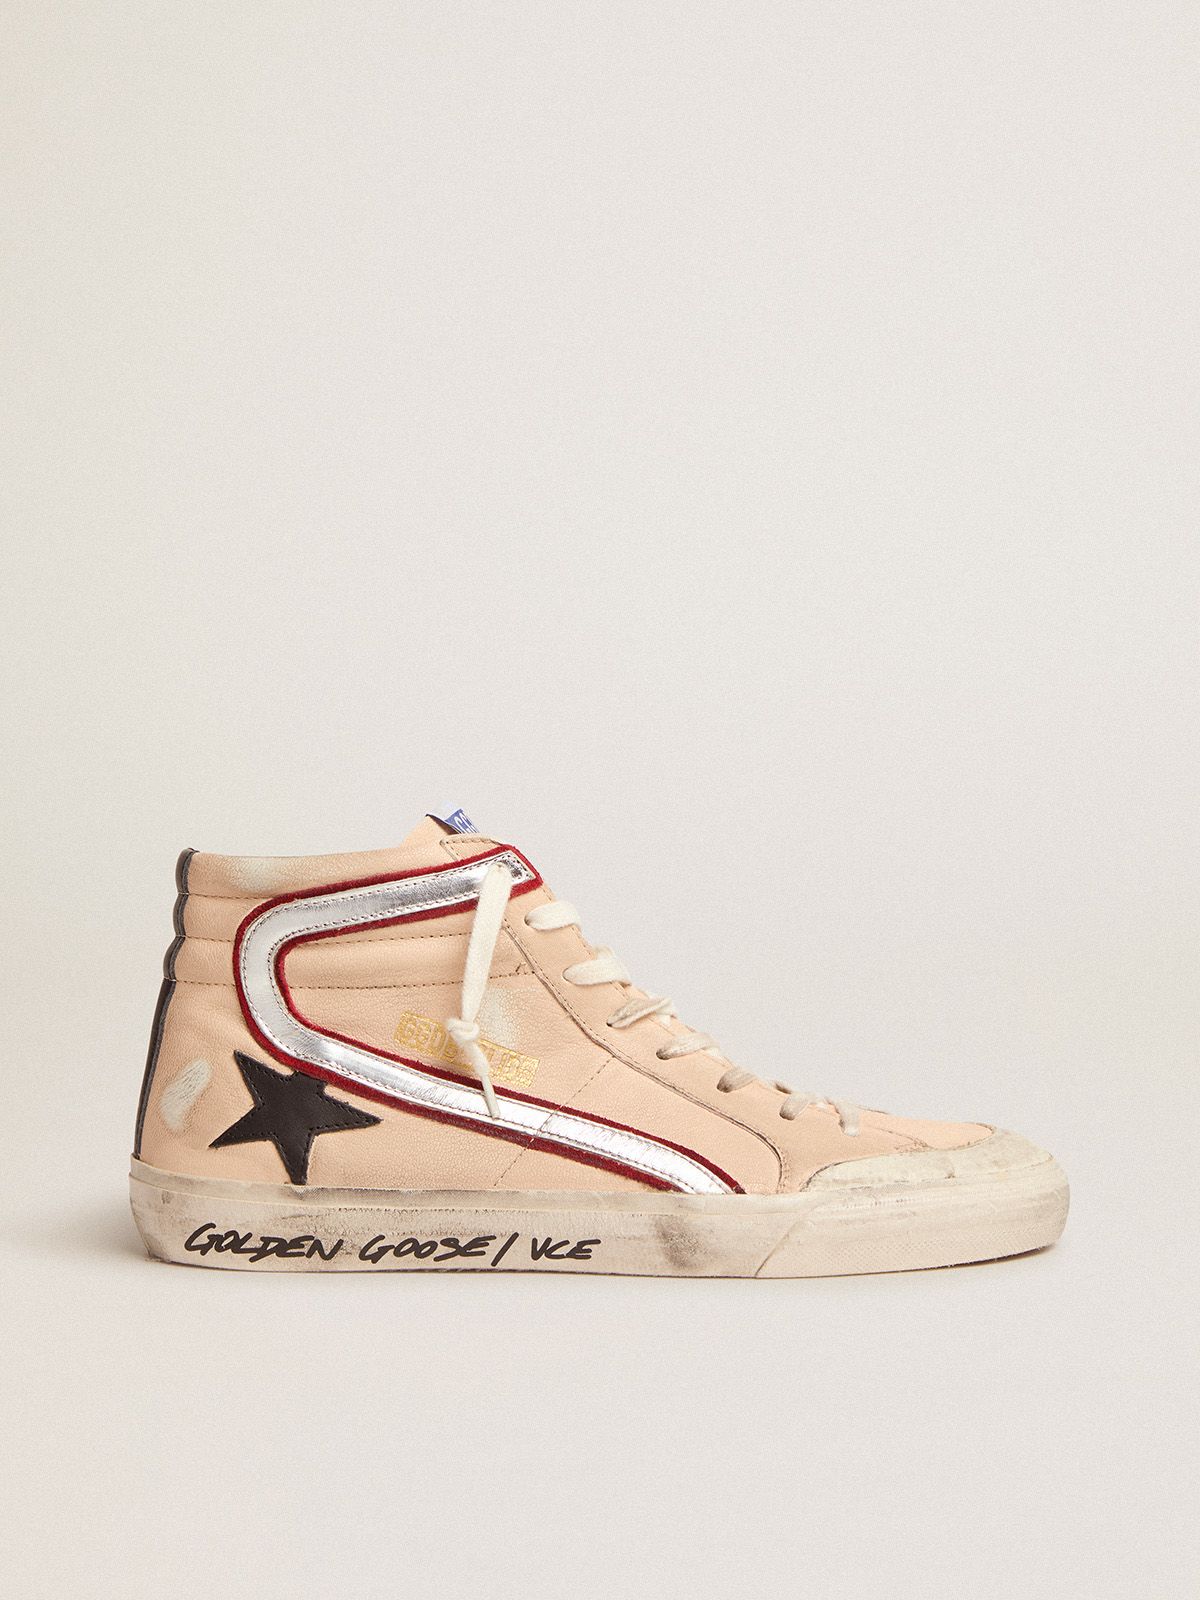 Golden Goose Donna Sneakers Slide Penstar sneakers in pale salmon-colored nappa leather with black leather star and silver laminated leather flash